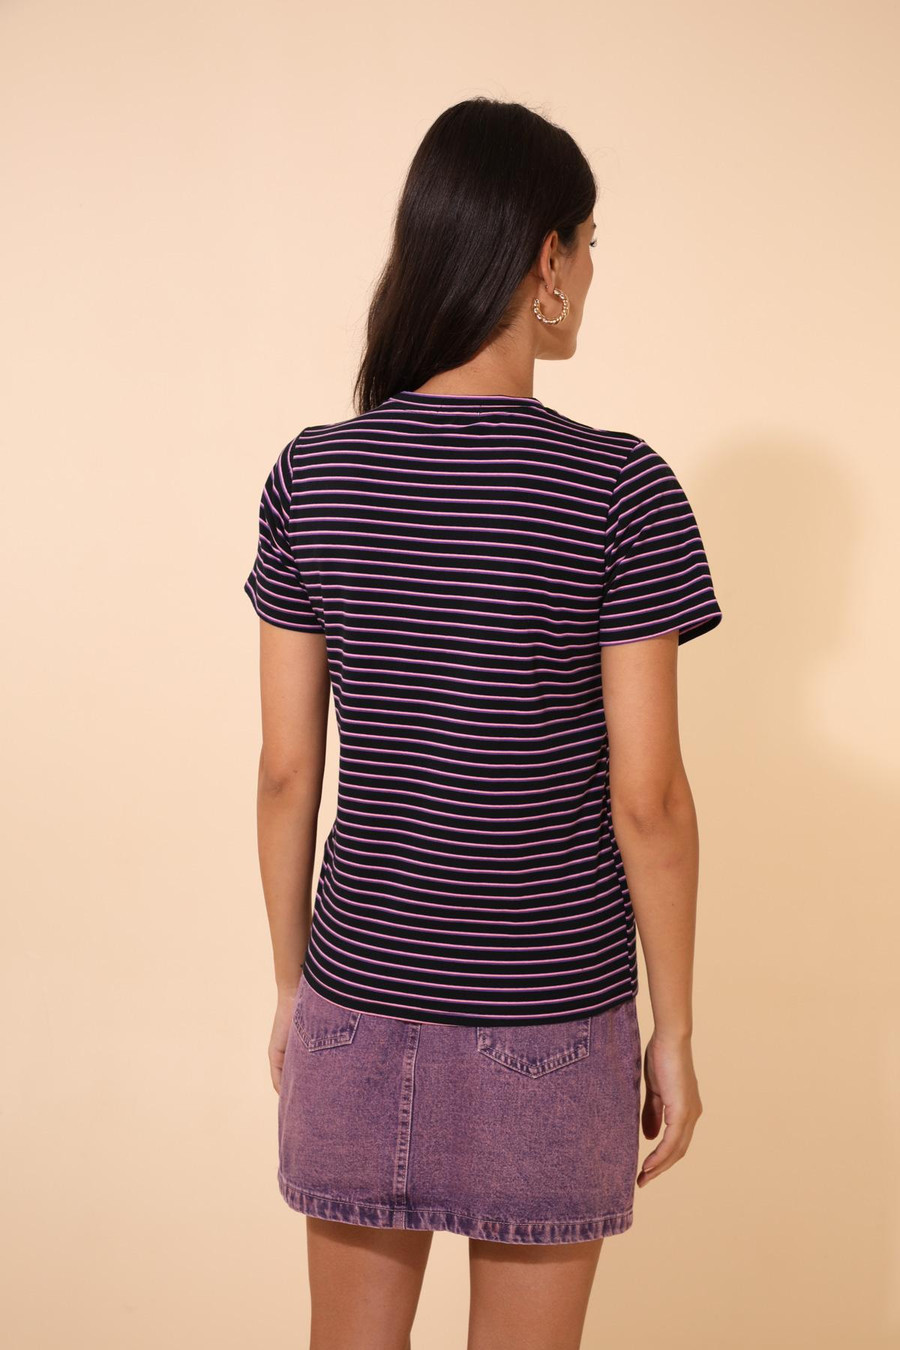 Good Day Embroidered Tee {Stripe}